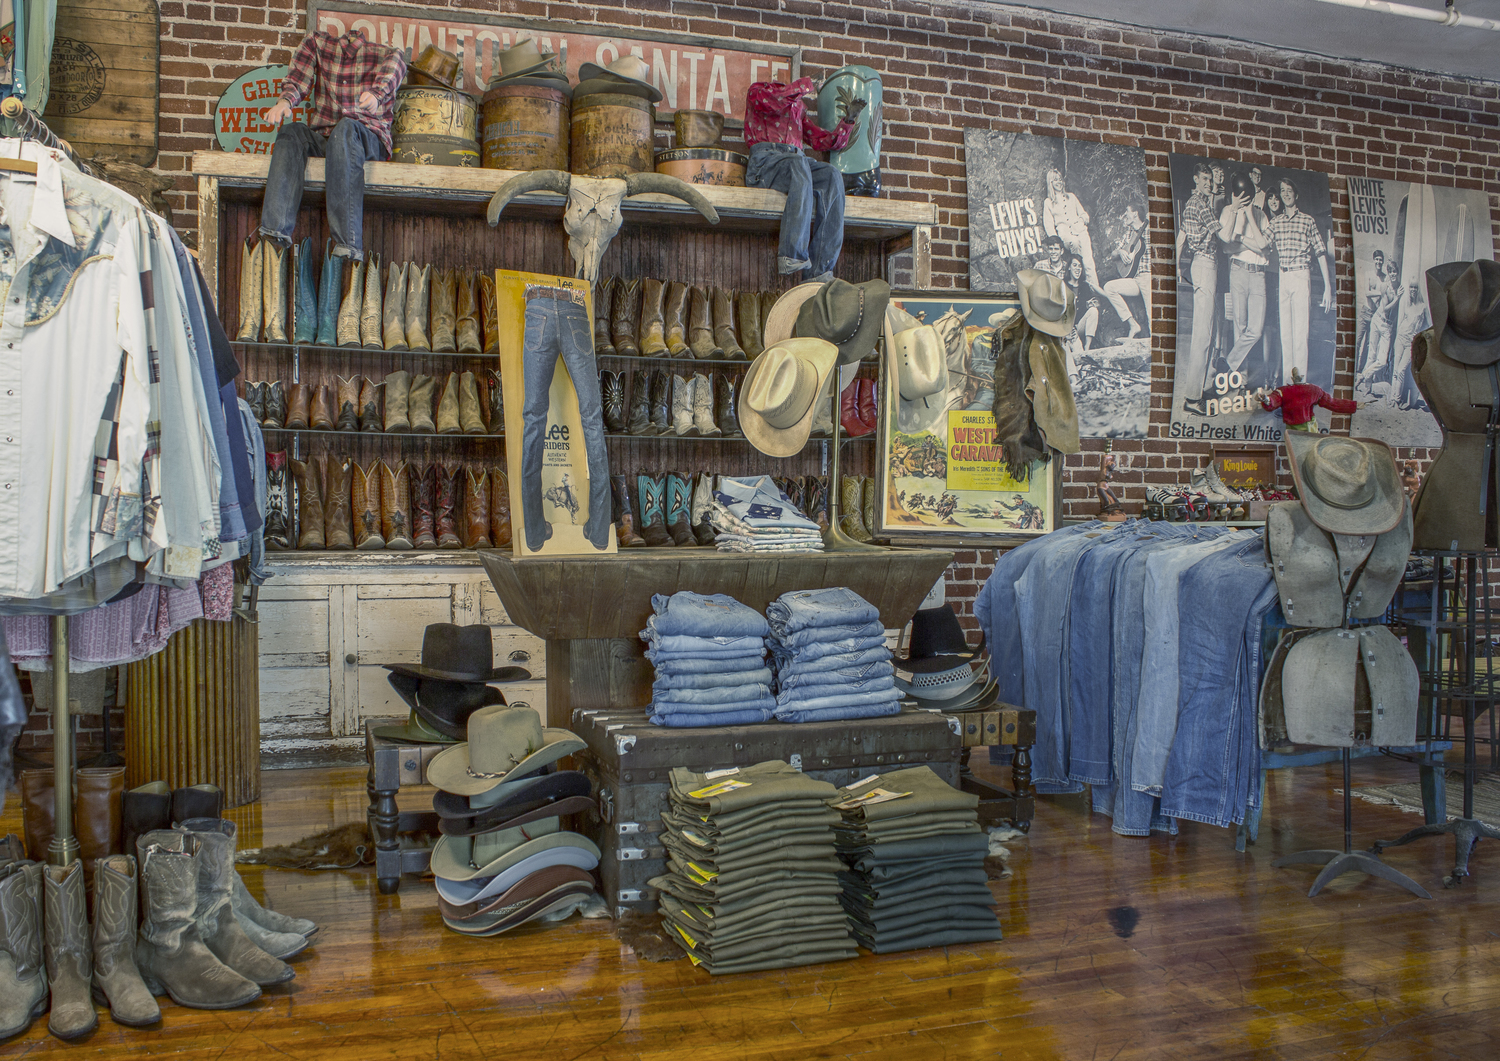 CHAD'S DRYGOODS: AMERICAN BLUES TRADING COMPANY